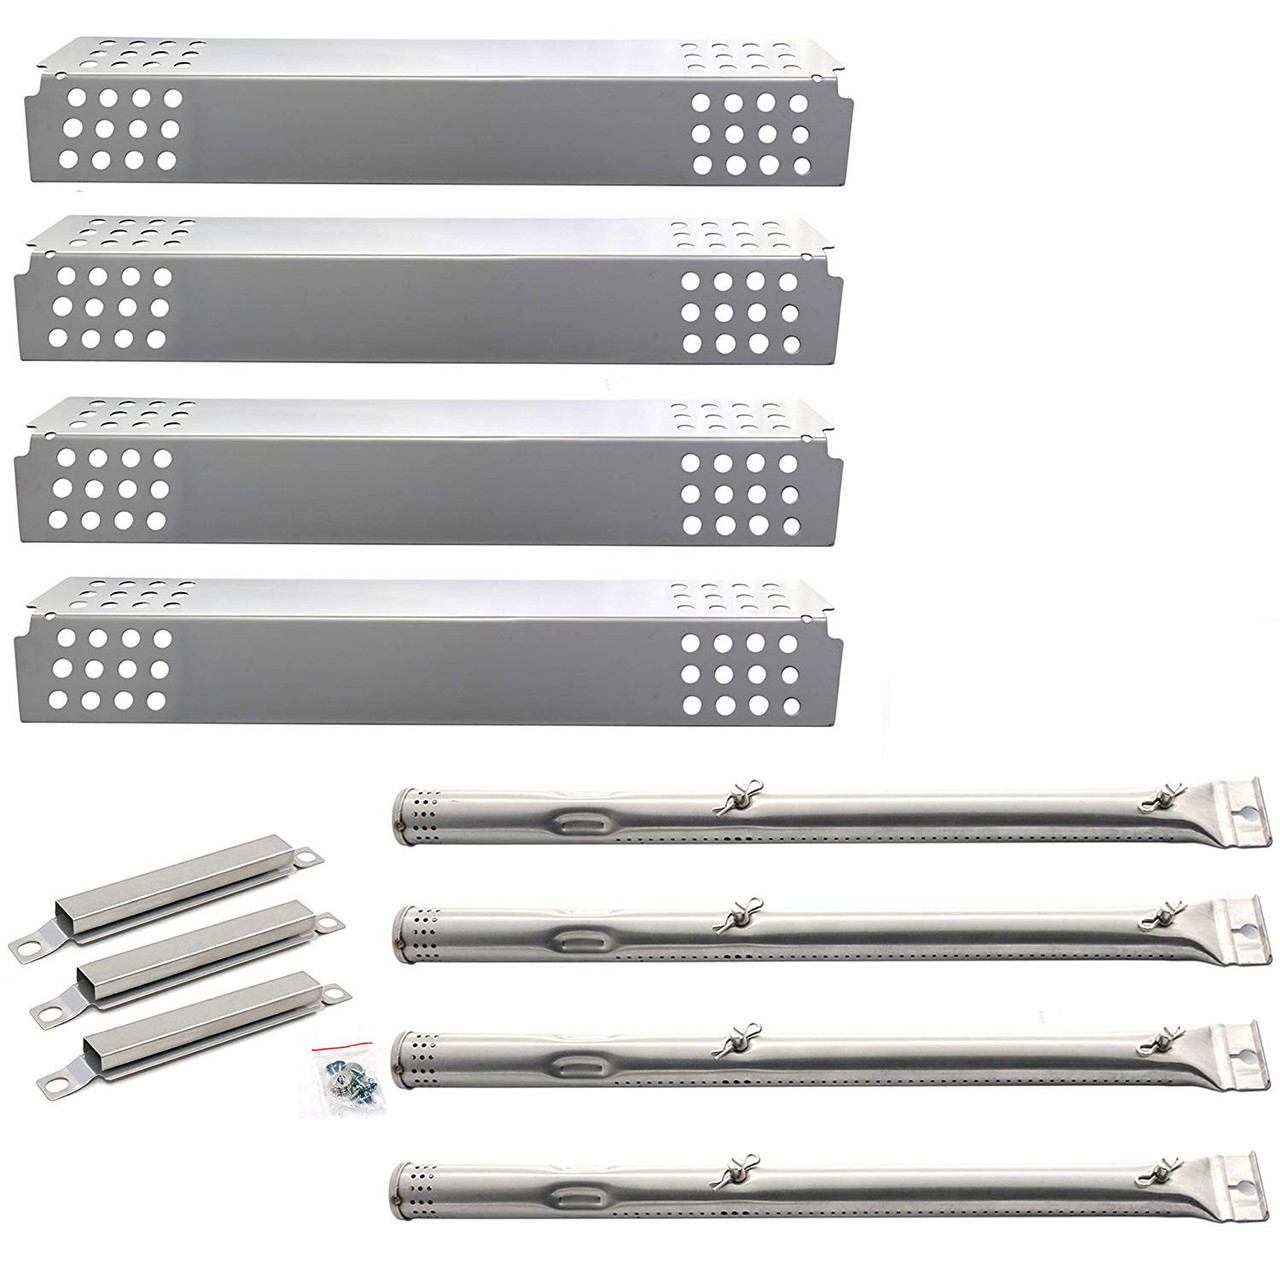 Stainless Steel BBQ Grill Heat Plate Shield Tent Burner Cover Kit for Charbroil 